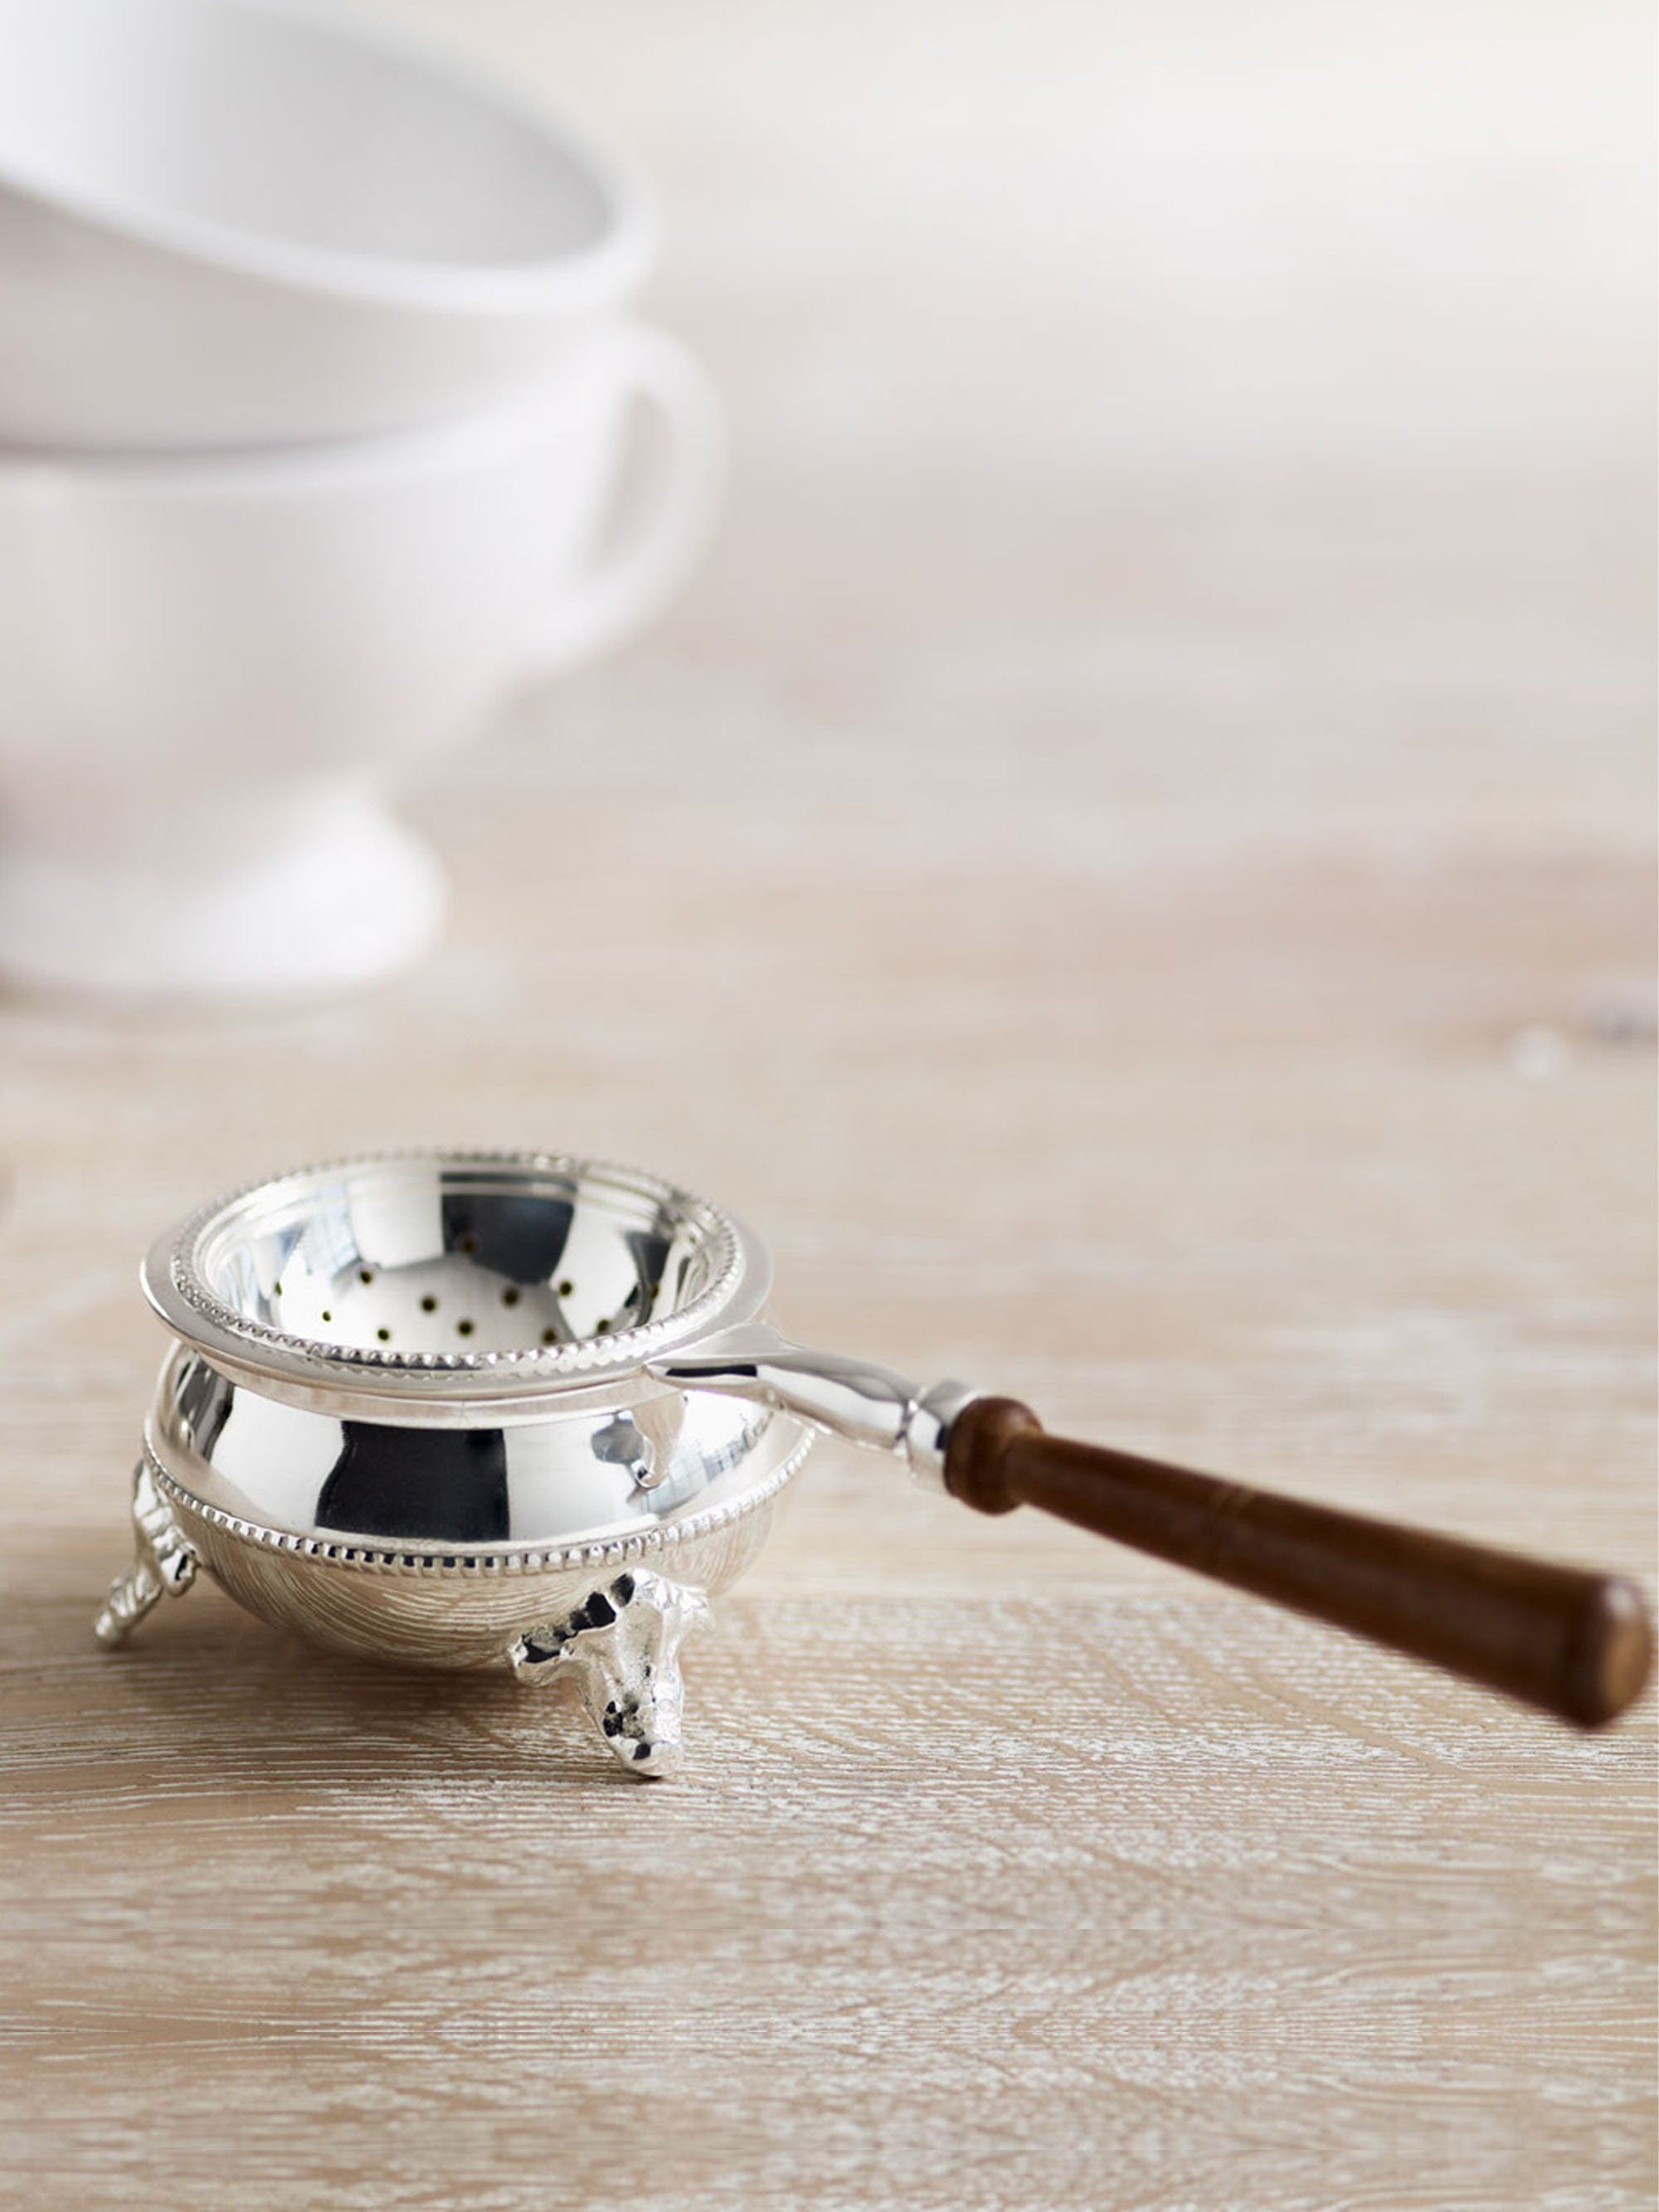 Tea Strainer - Silver Plated, Long Handle with Nest - Harney